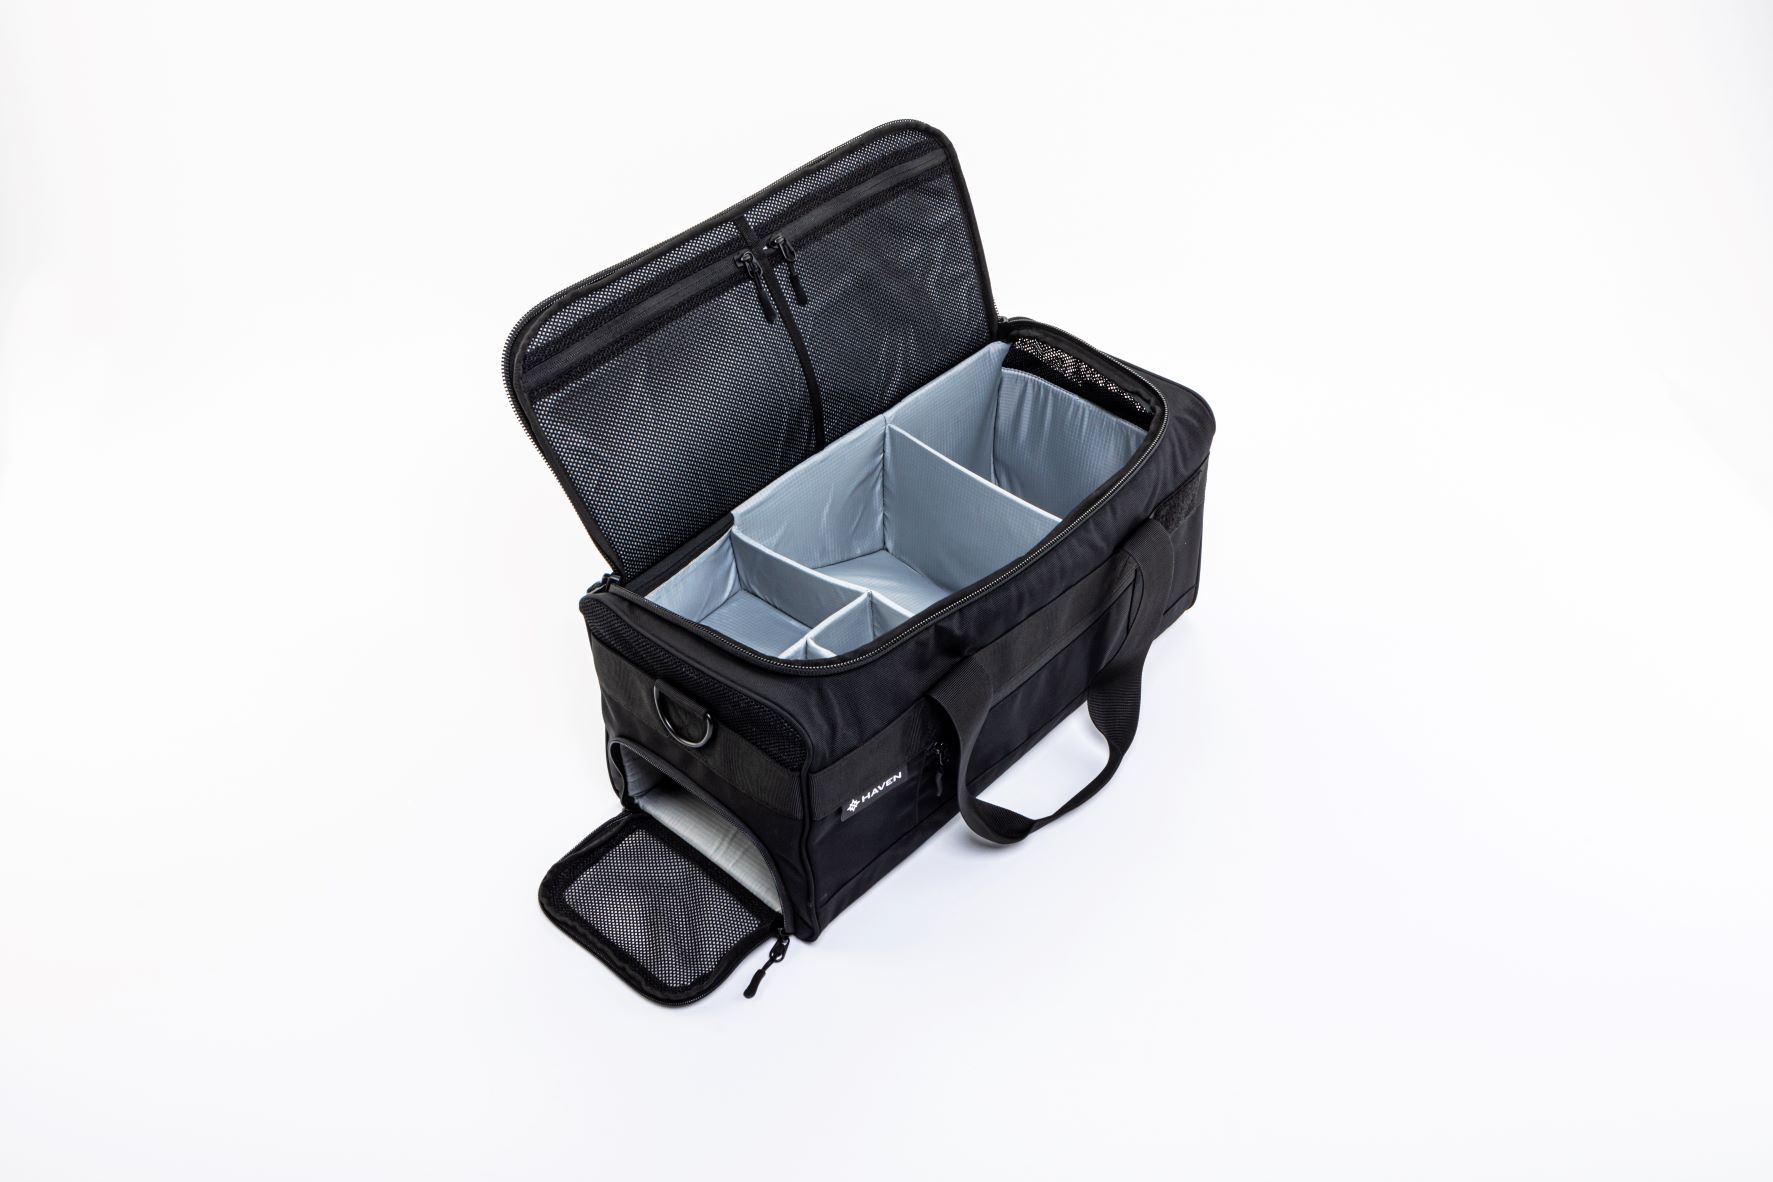 Haven Athletic gym bag features compartments and dividers for useful  internal organization » Gadget Flow